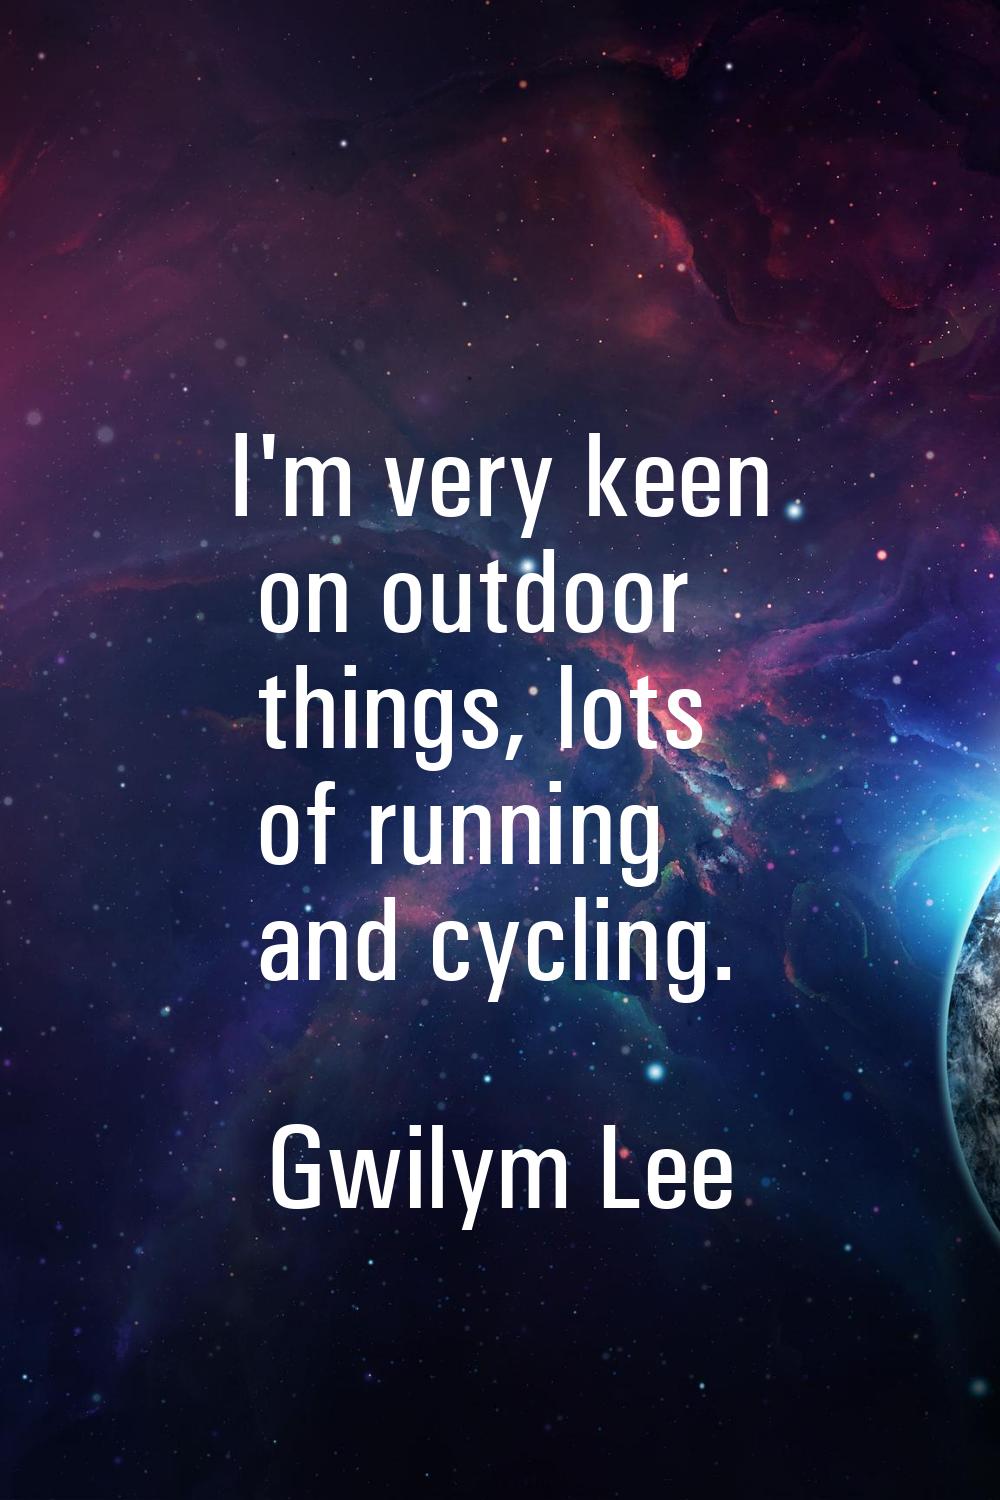 I'm very keen on outdoor things, lots of running and cycling.